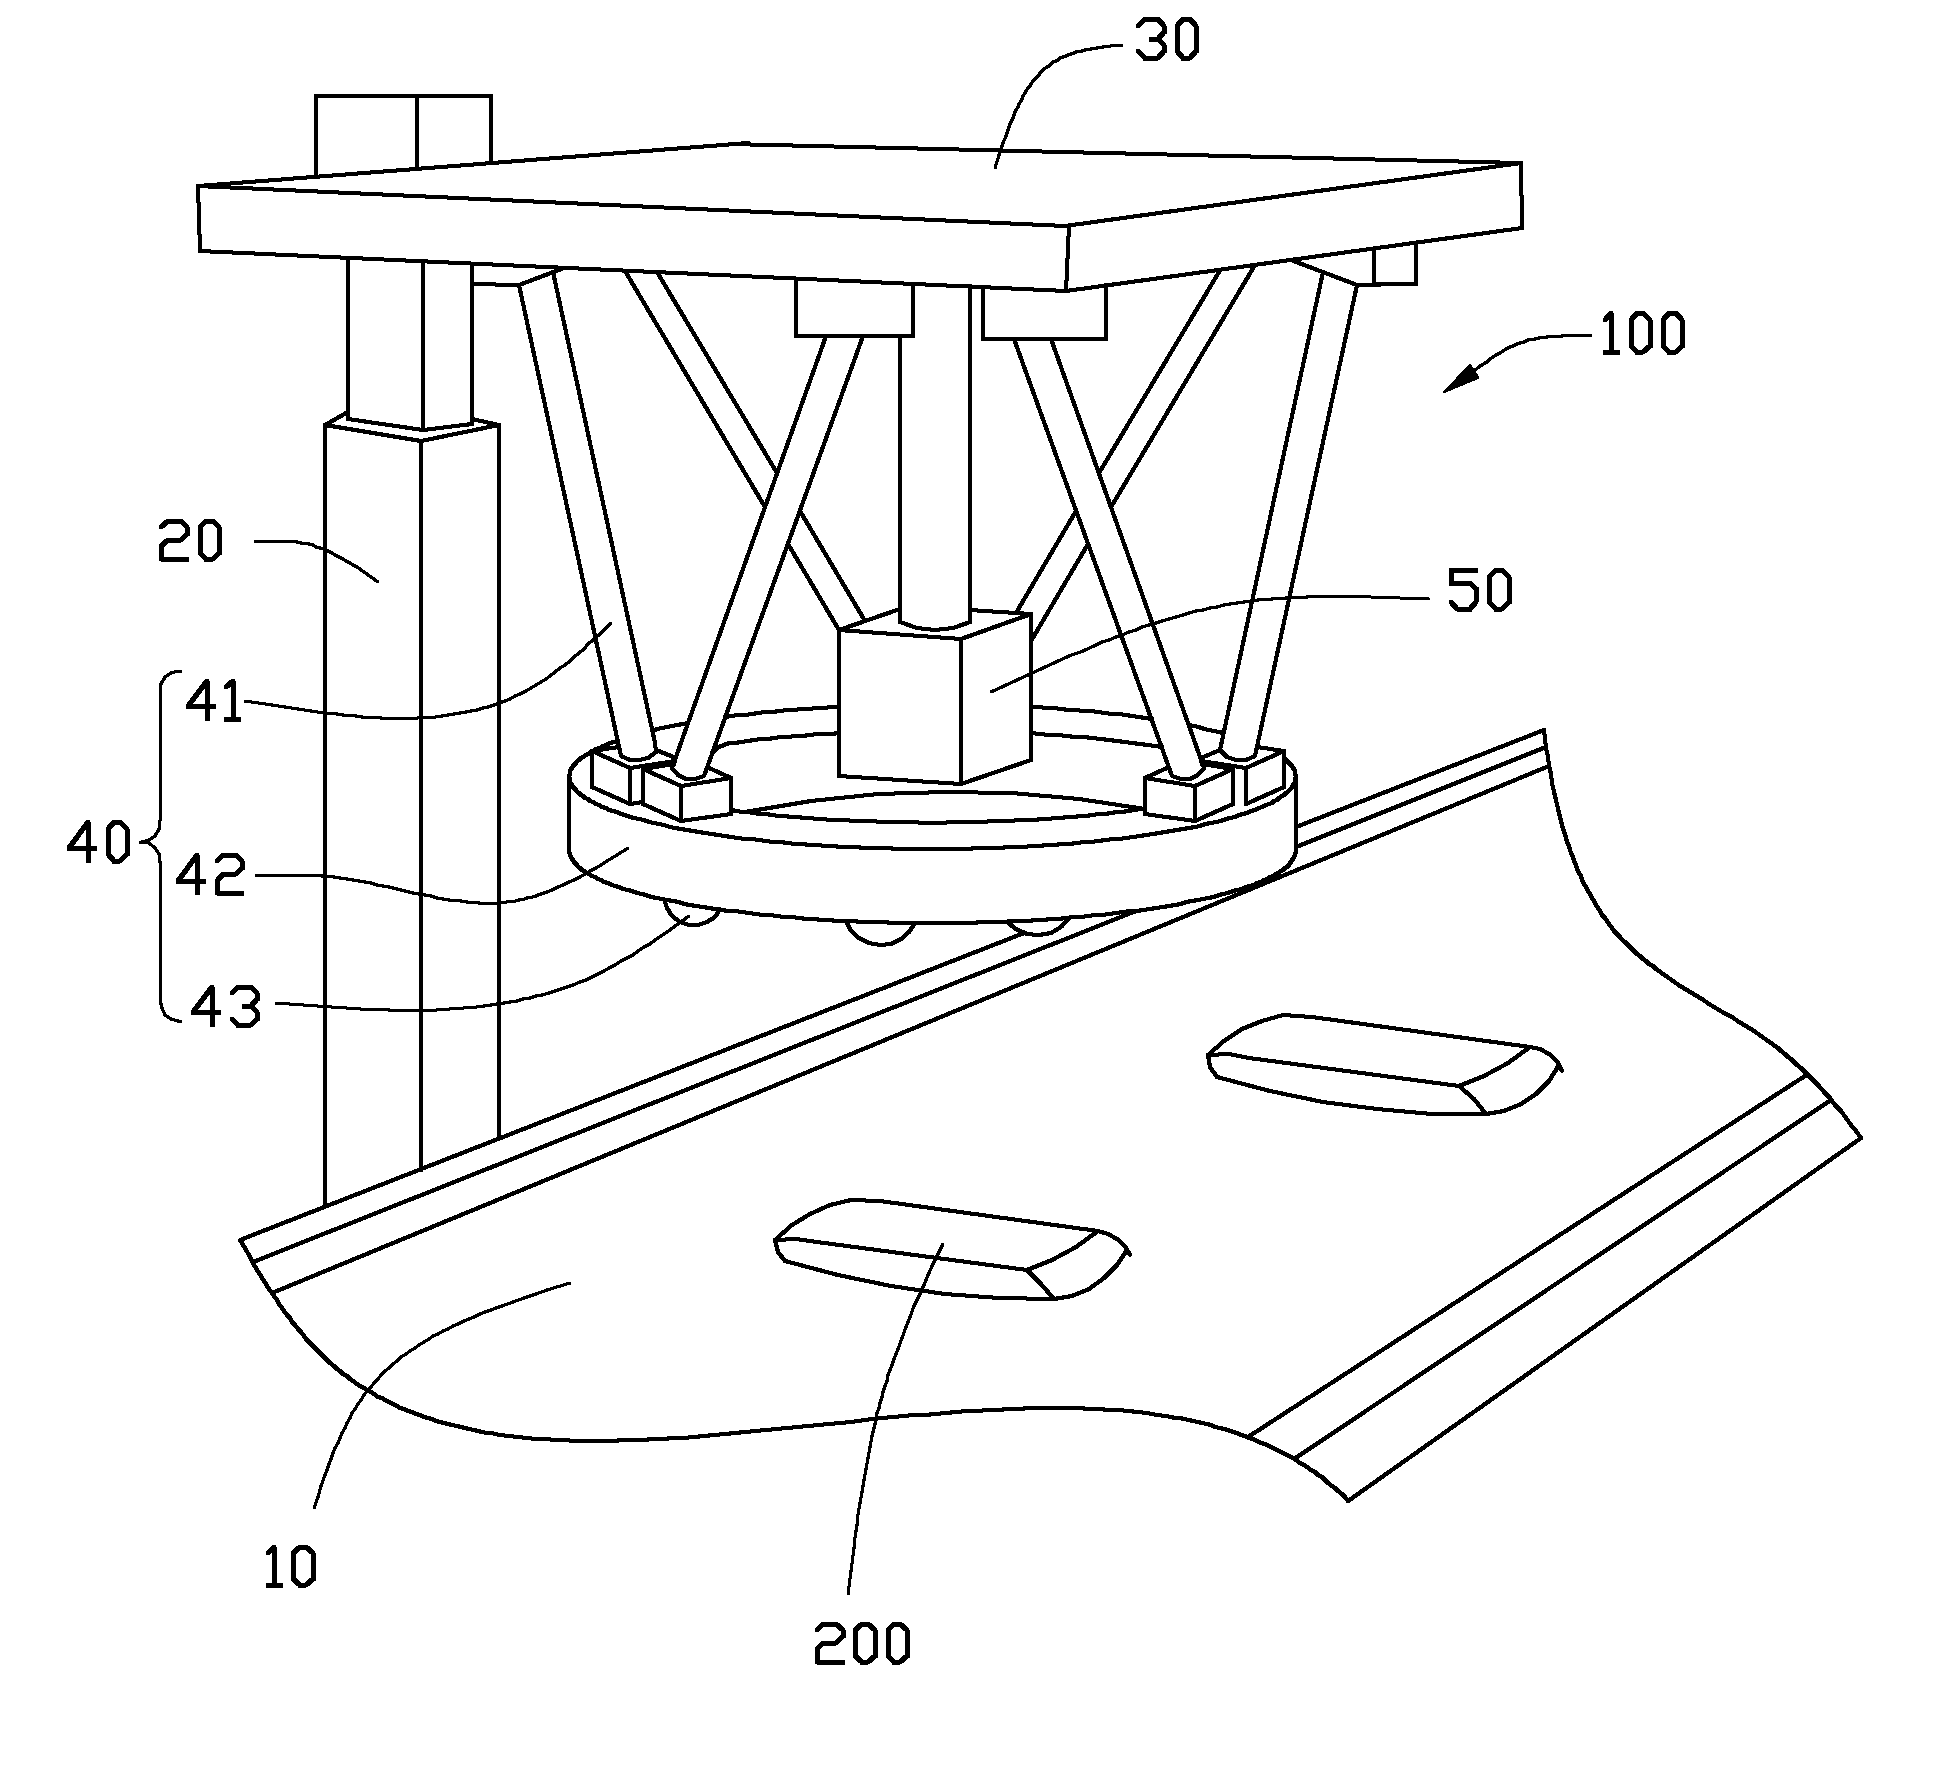 Device for determining surface defects